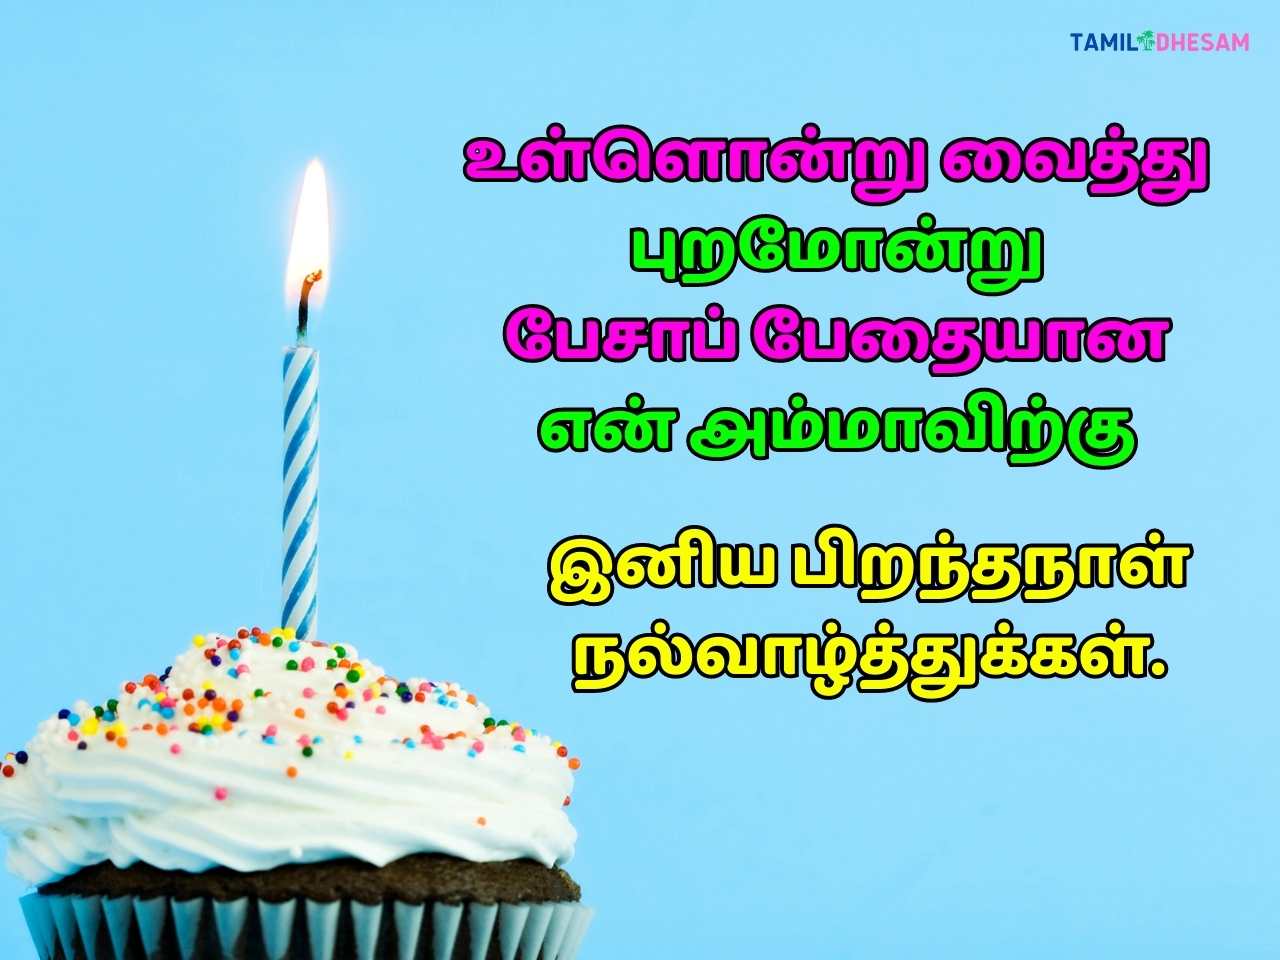 Birthday Wishes in Tamil for amma